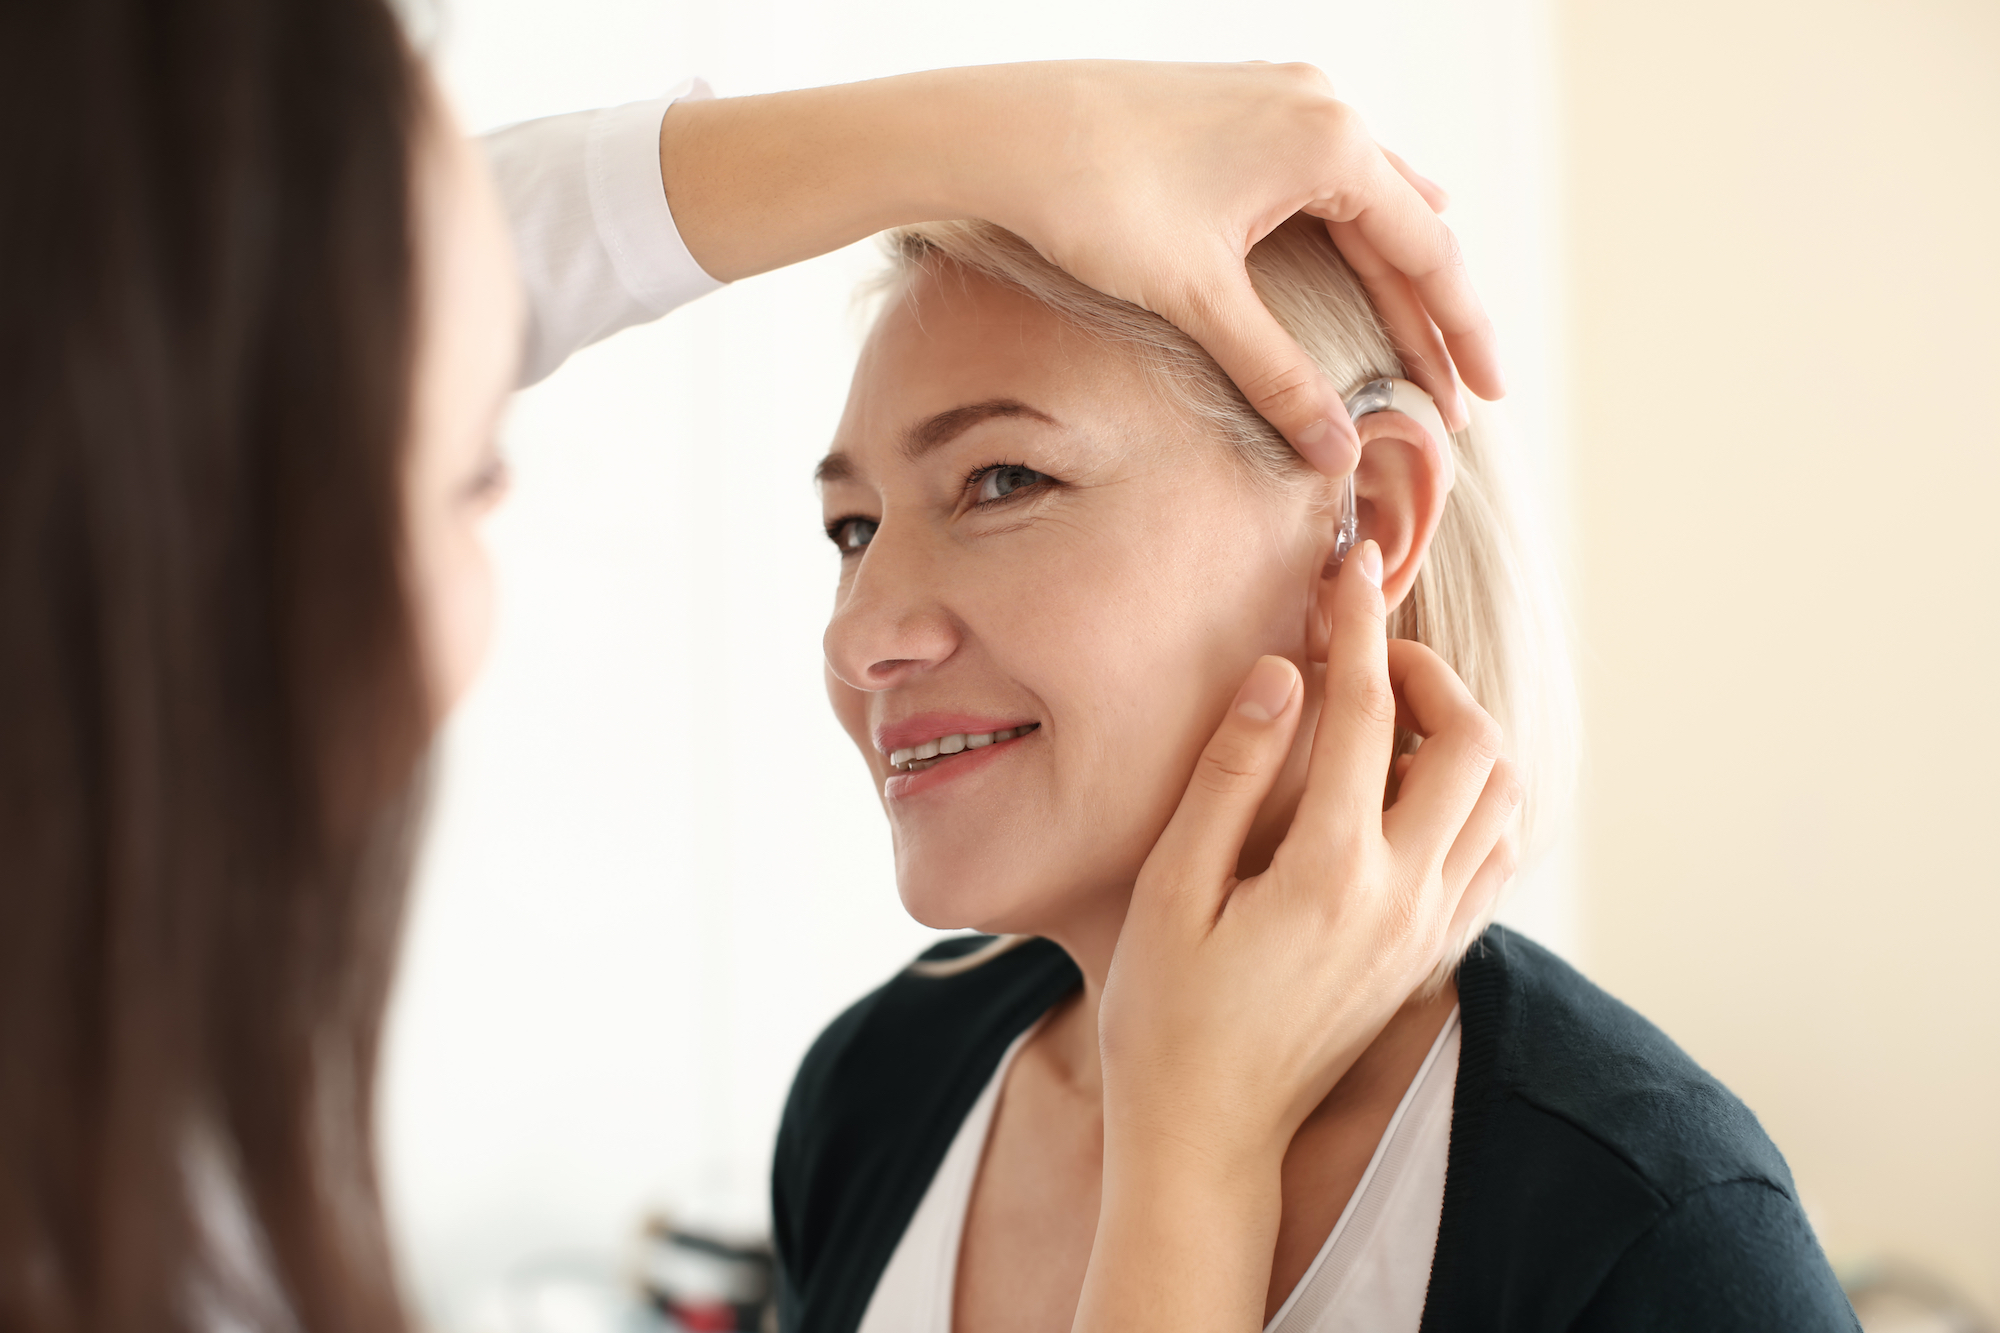 Otolaryngologist putting hearing aid in woman's ear on light background